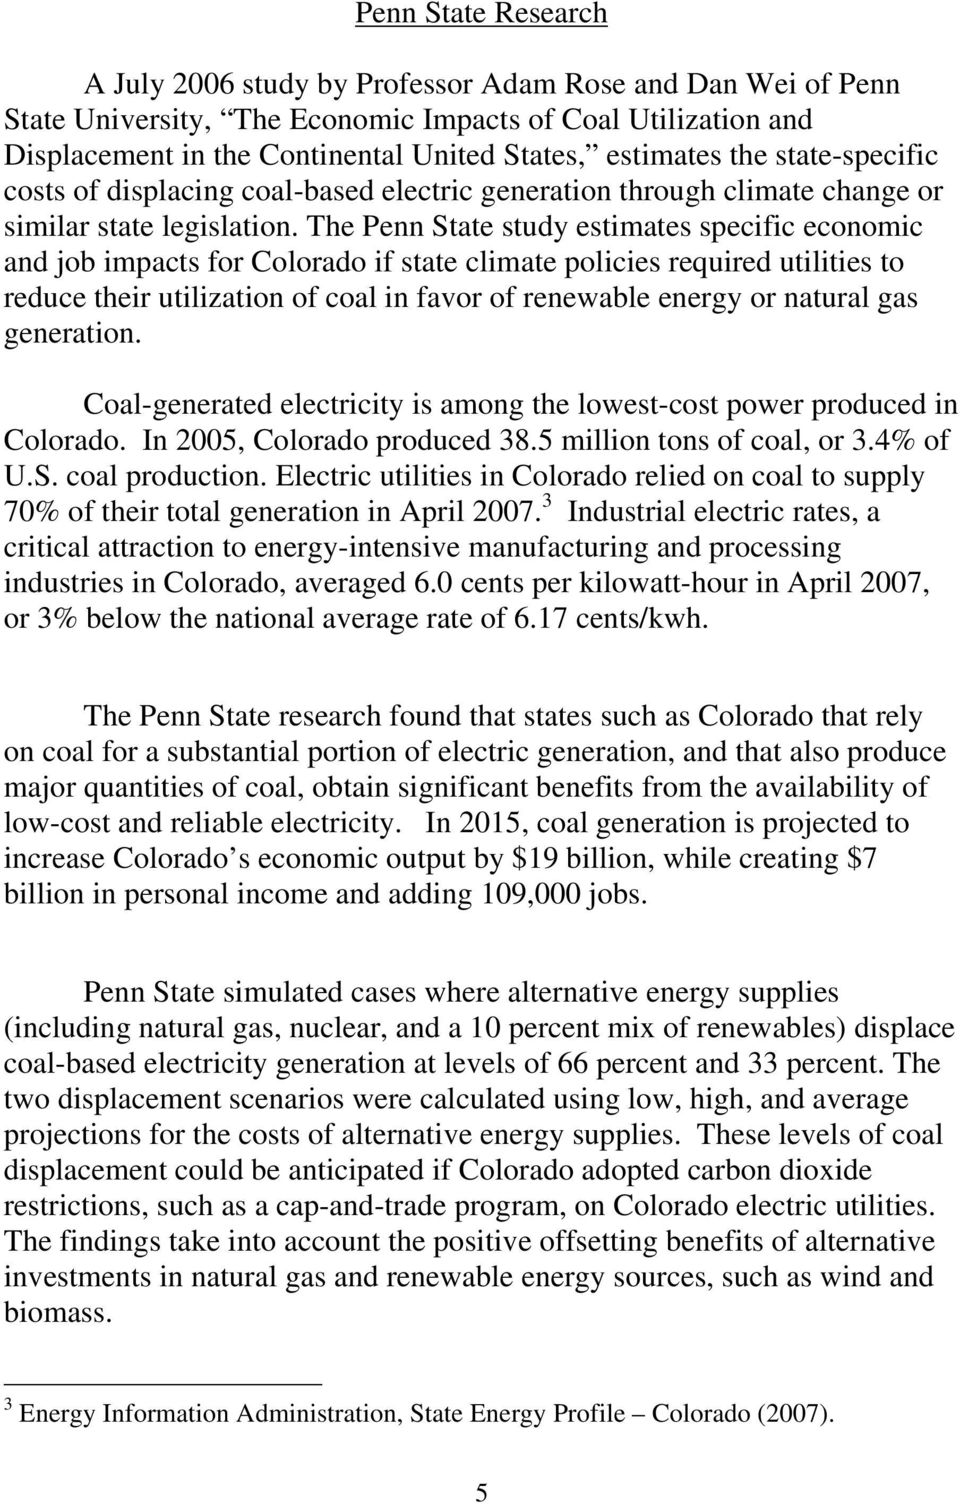 The Penn State study estimates specific economic and job impacts for Colorado if state climate policies required utilities to reduce their utilization of coal in favor of renewable energy or natural